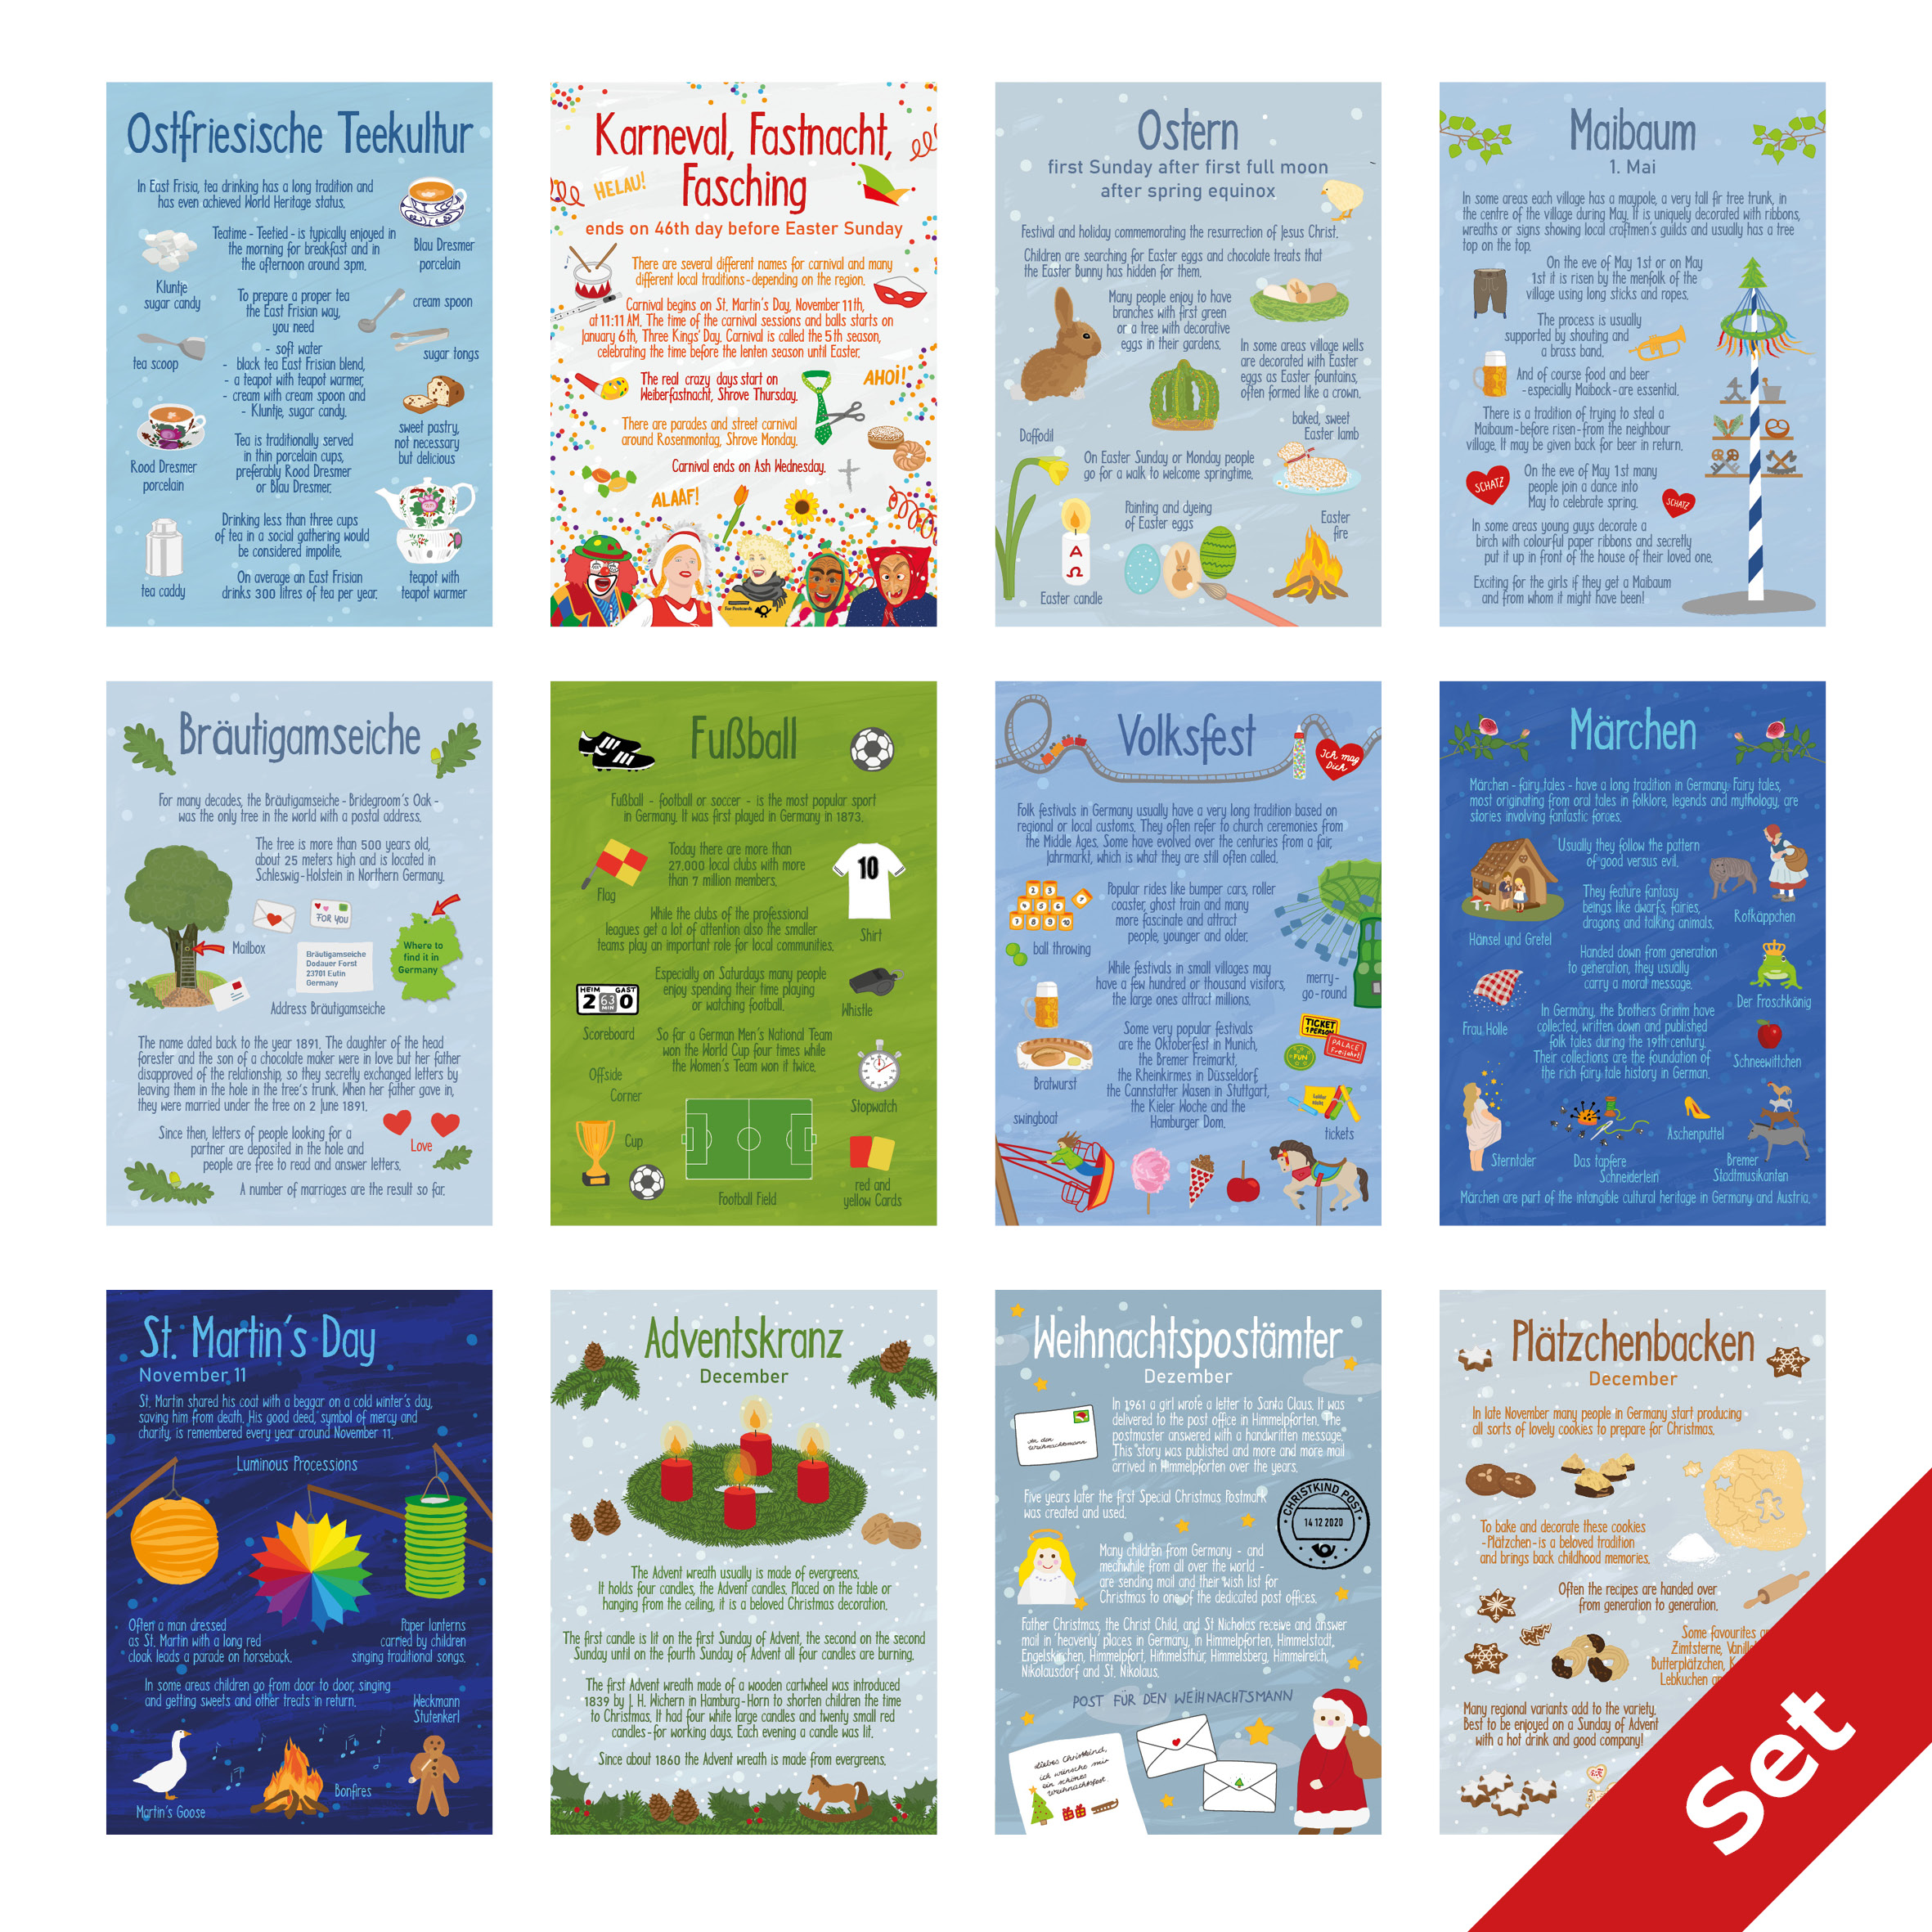 12 Traditions in Germany - set of 12 cards